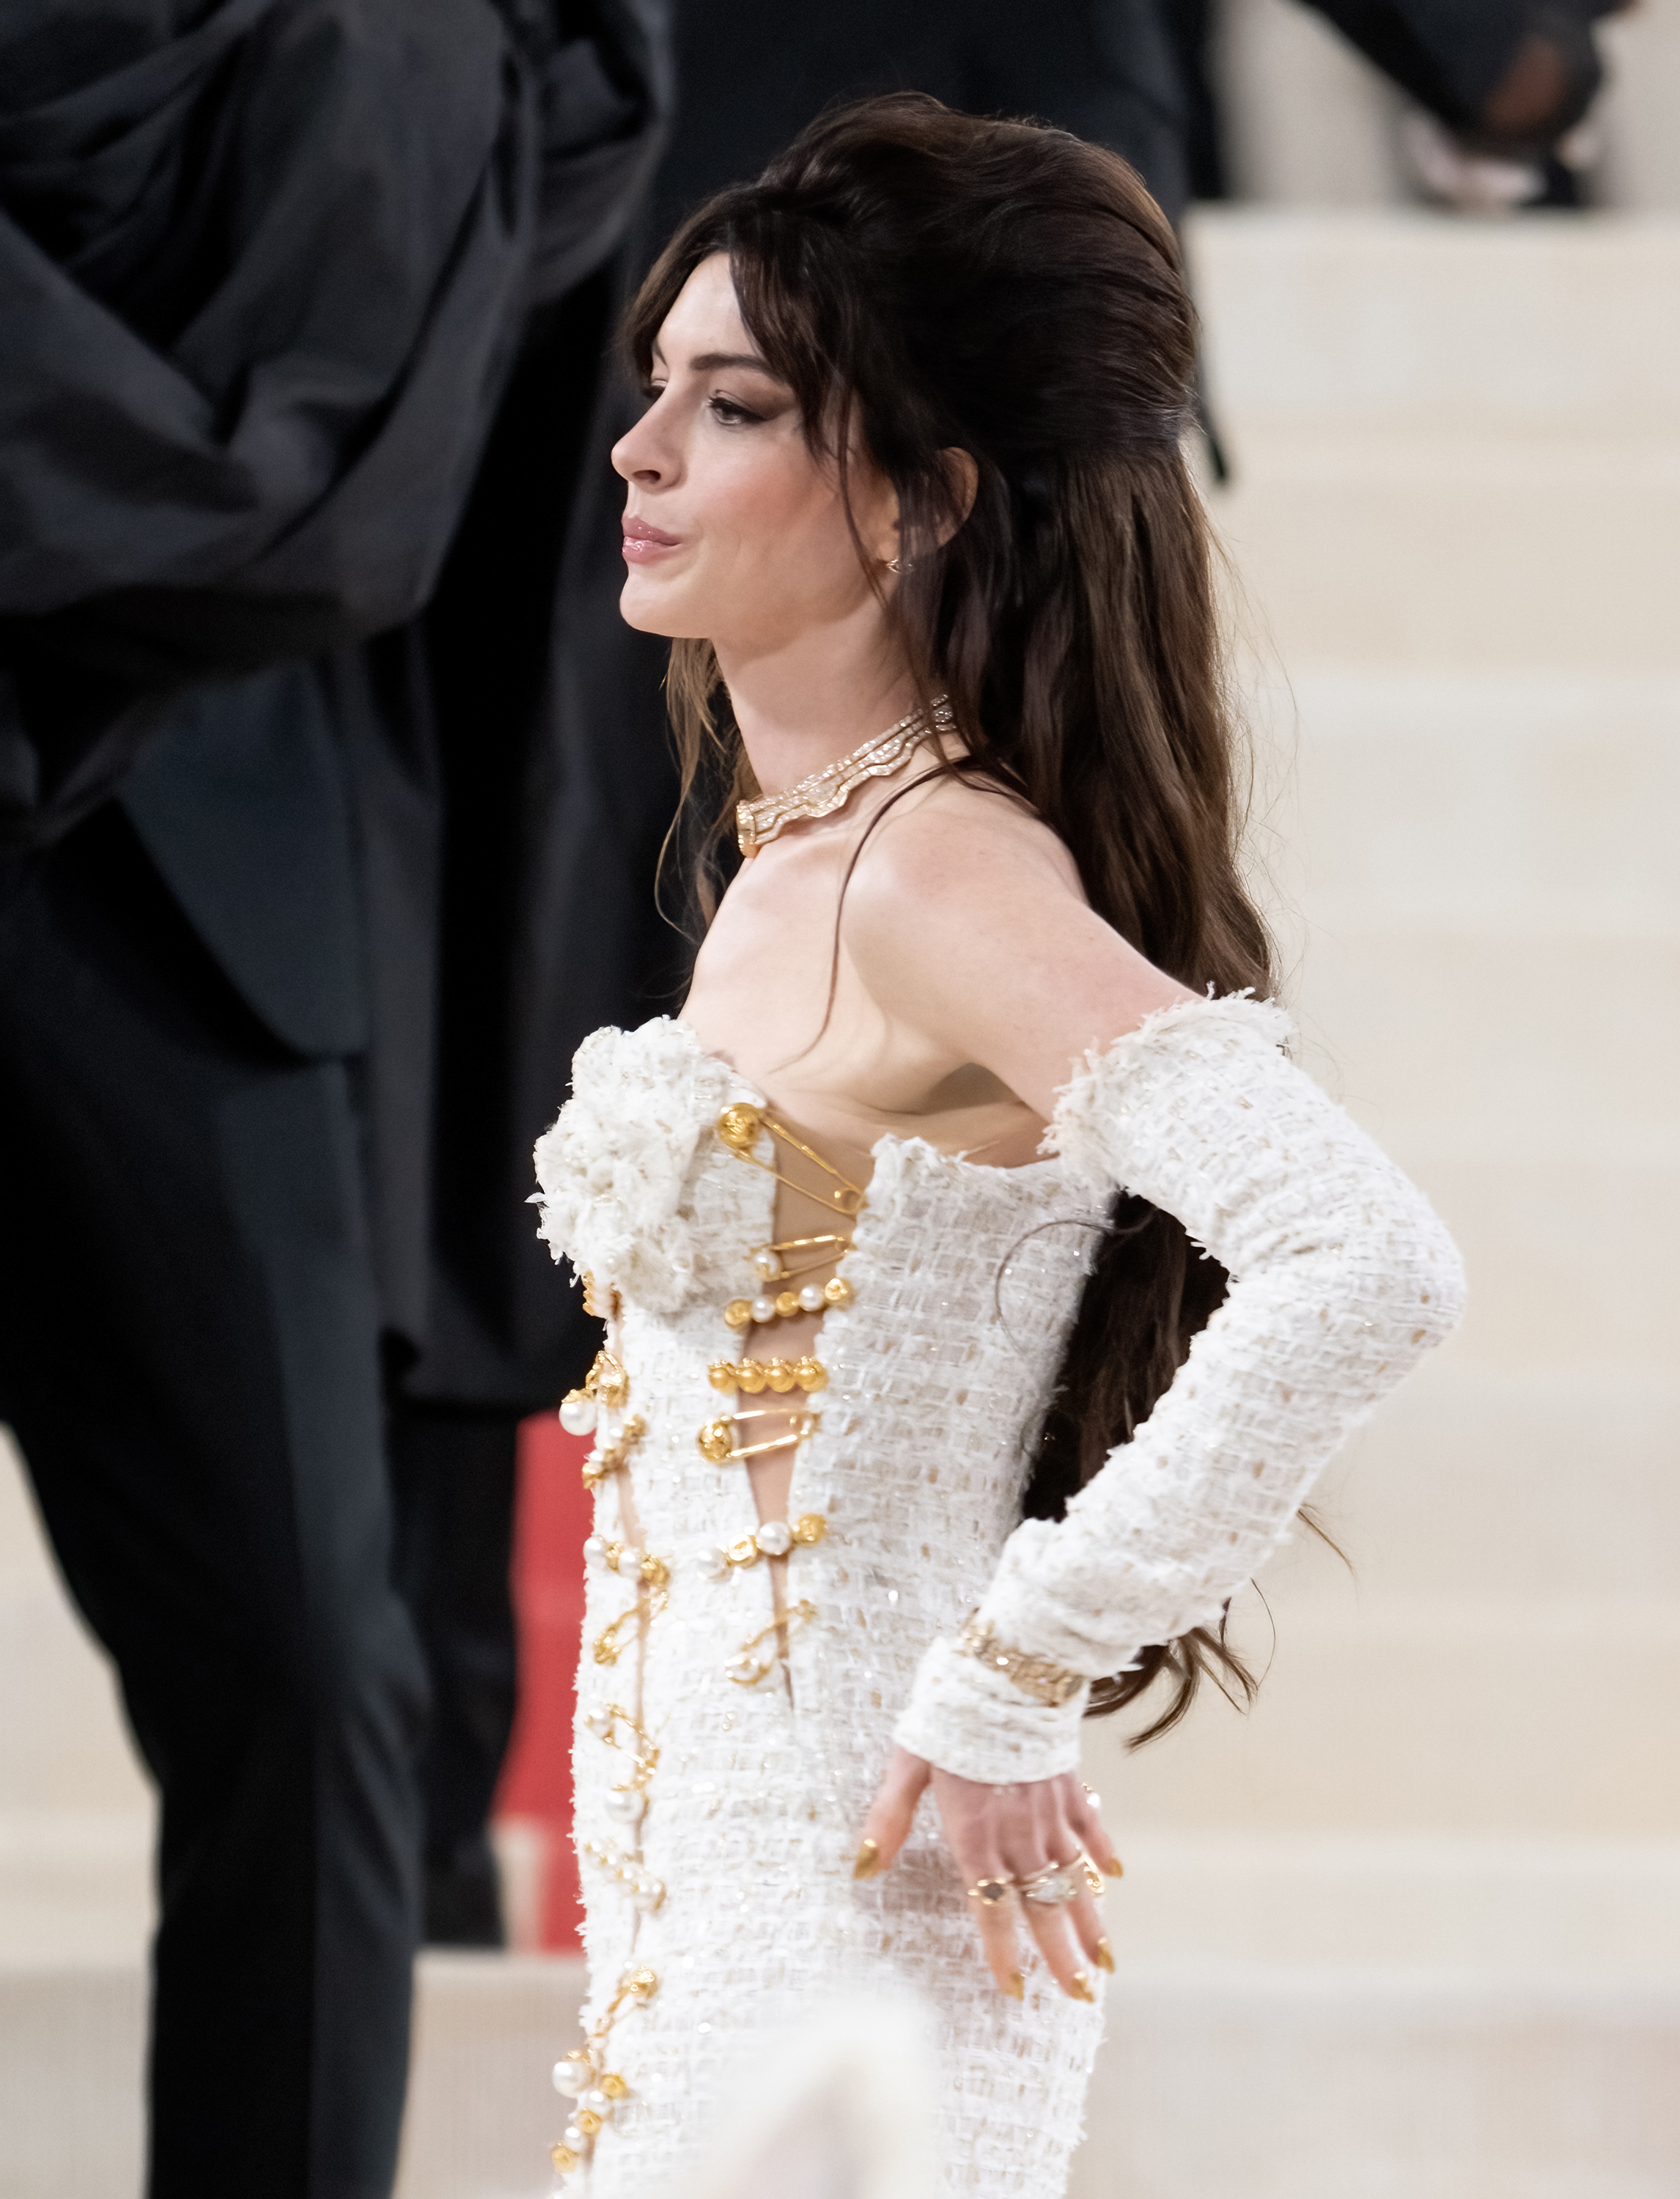 Anne in an embellished white dress with puffed sleeves at an event